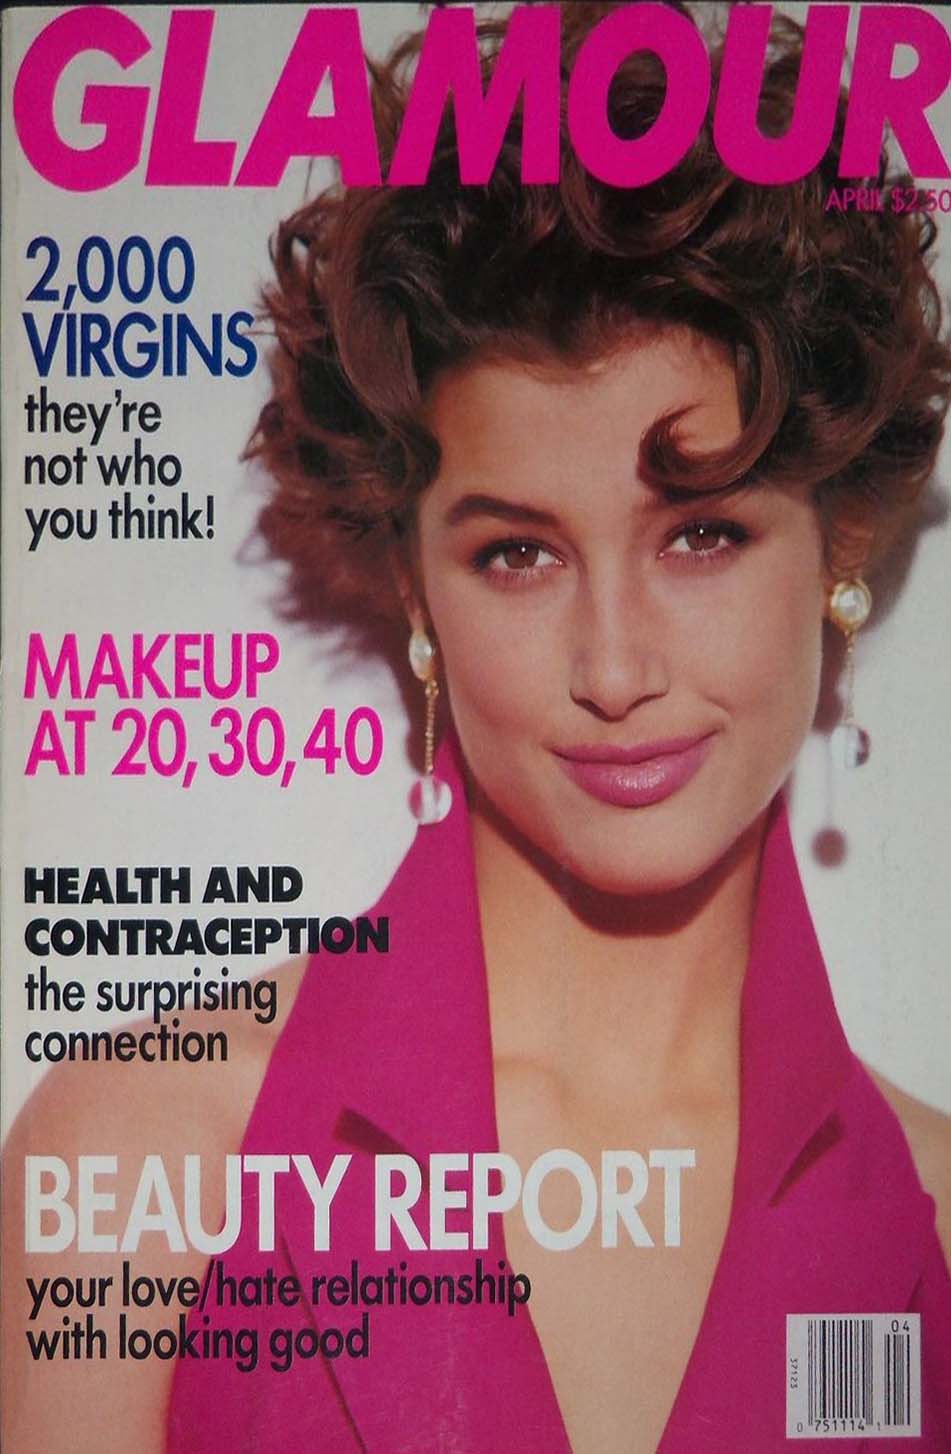 Glamour April 1992 magazine back issue Glamour magizine back copy Glamour April 1992 Womens Magazine Back Issue Published by Conde Nast Publications. 2,000 Virgins They're Not Who You Think!.